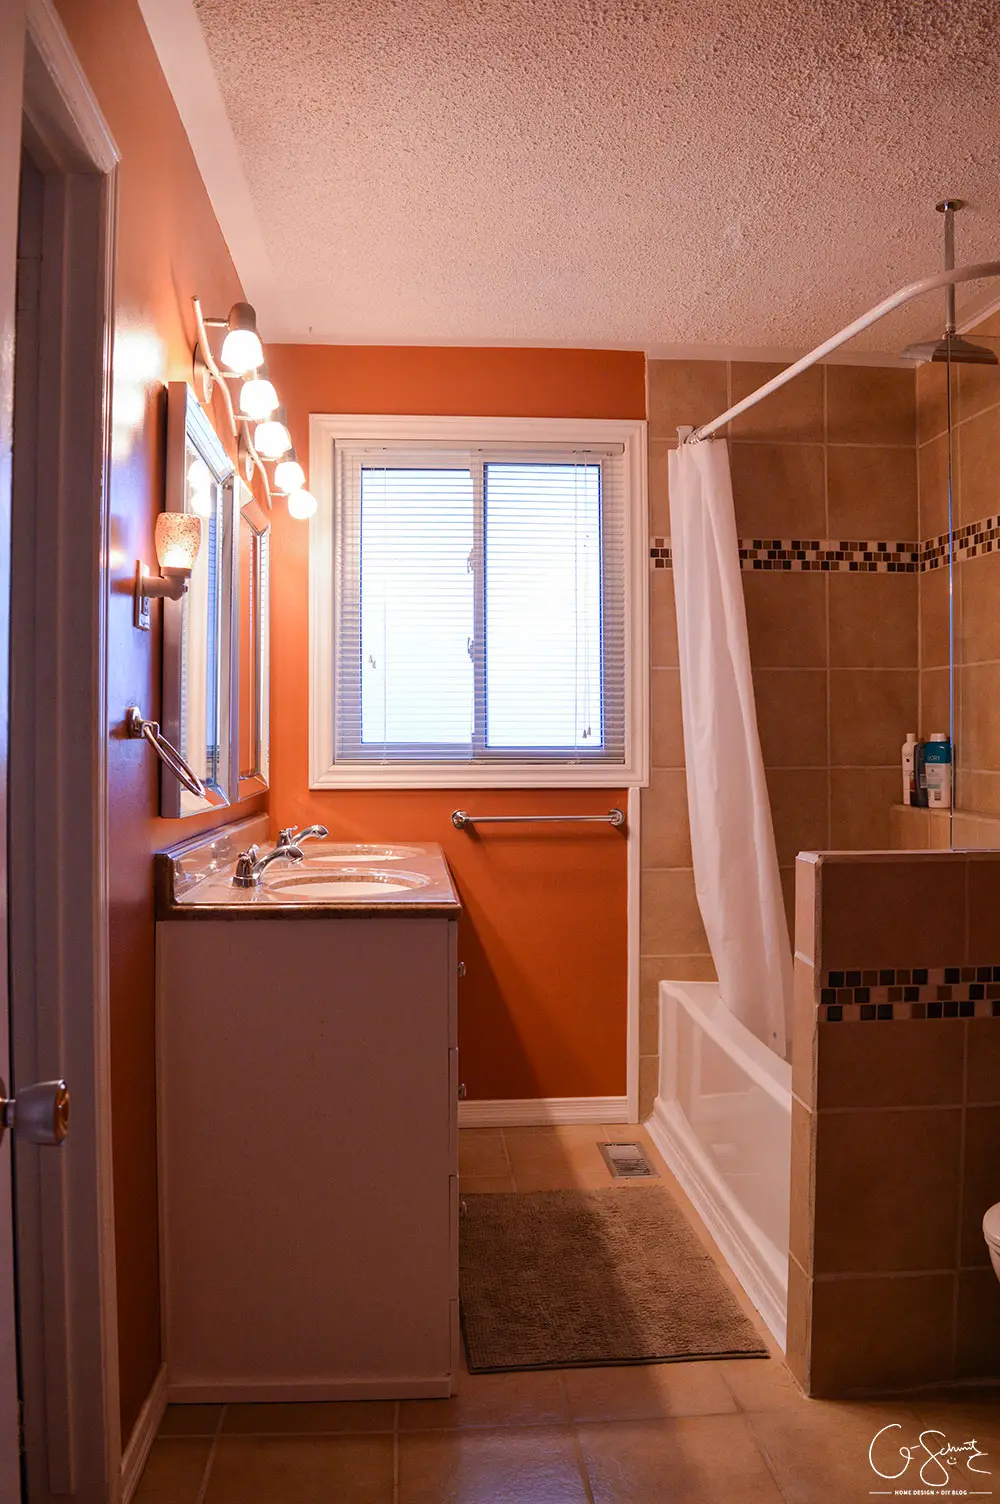 Have you ever tackled your own DIY bathroom renovation? Here is what our main bath looks like after we did ours! 